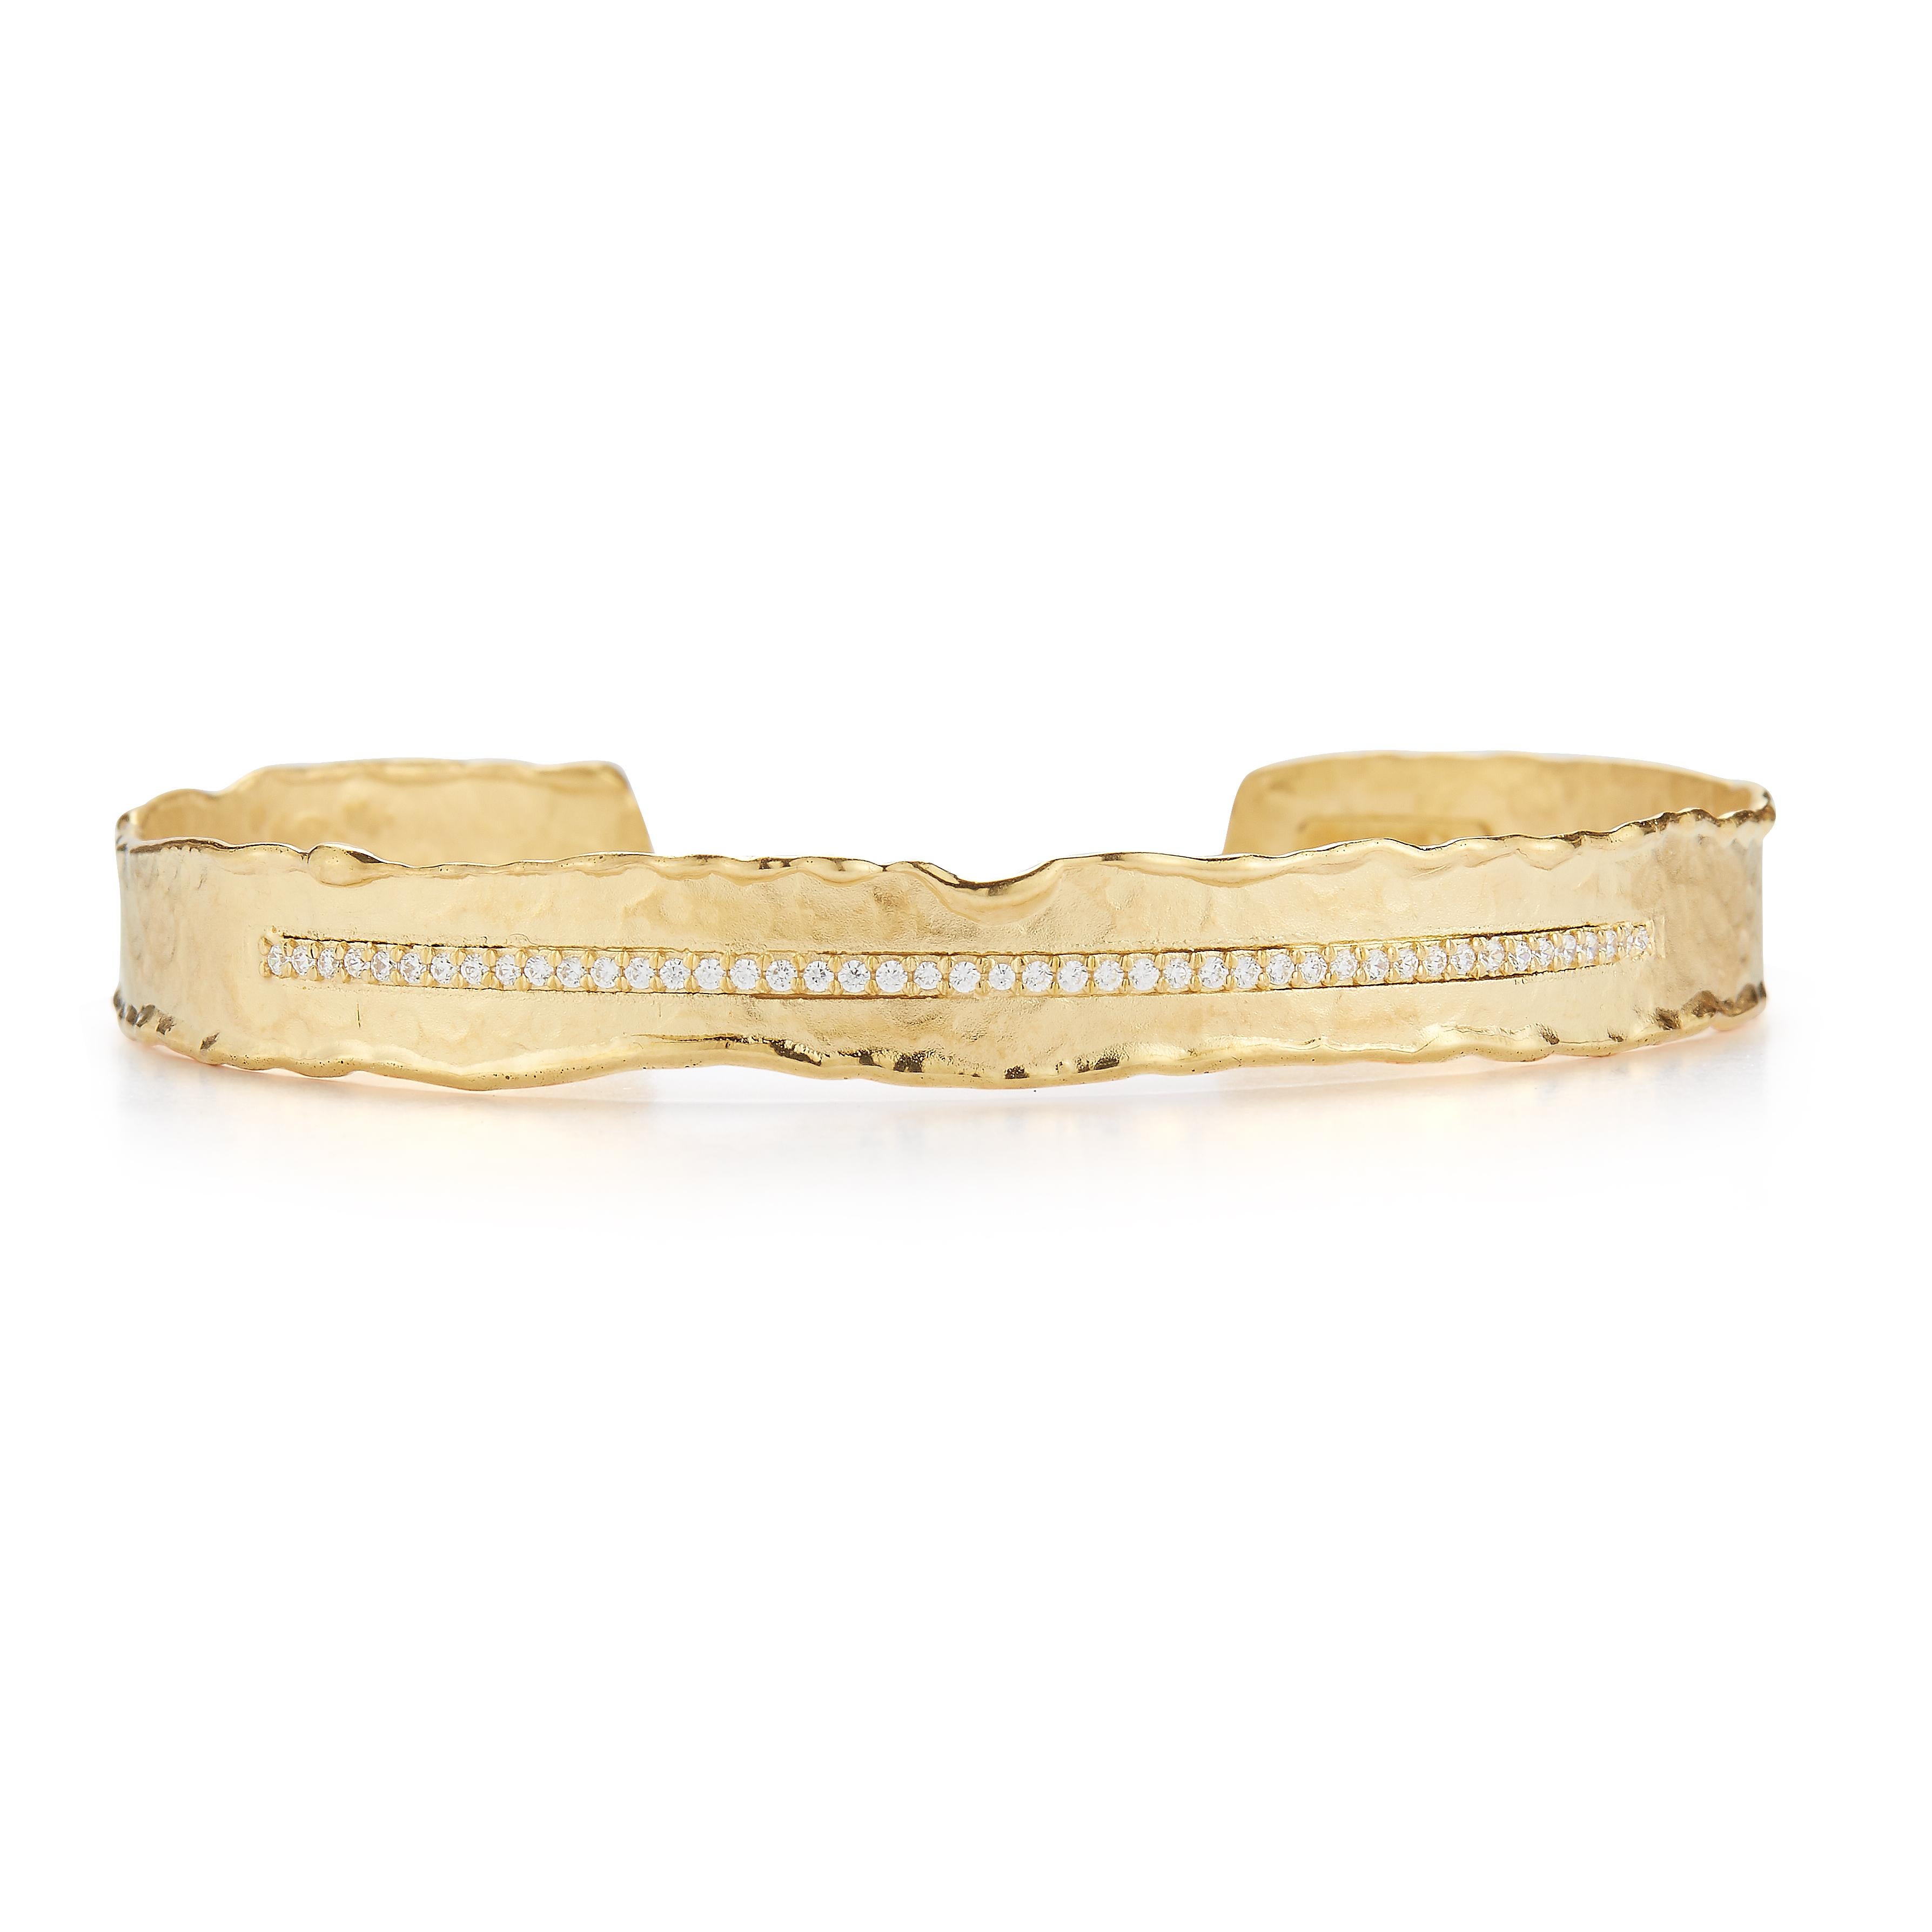 14 Karat Yellow Gold Hand-Crafted Matte and Hammer-Finished 8mm Ruffle-Edged Narrow Cuff Bracelet, Accented with 0.27 Carats of Pave Set Diamonds.
